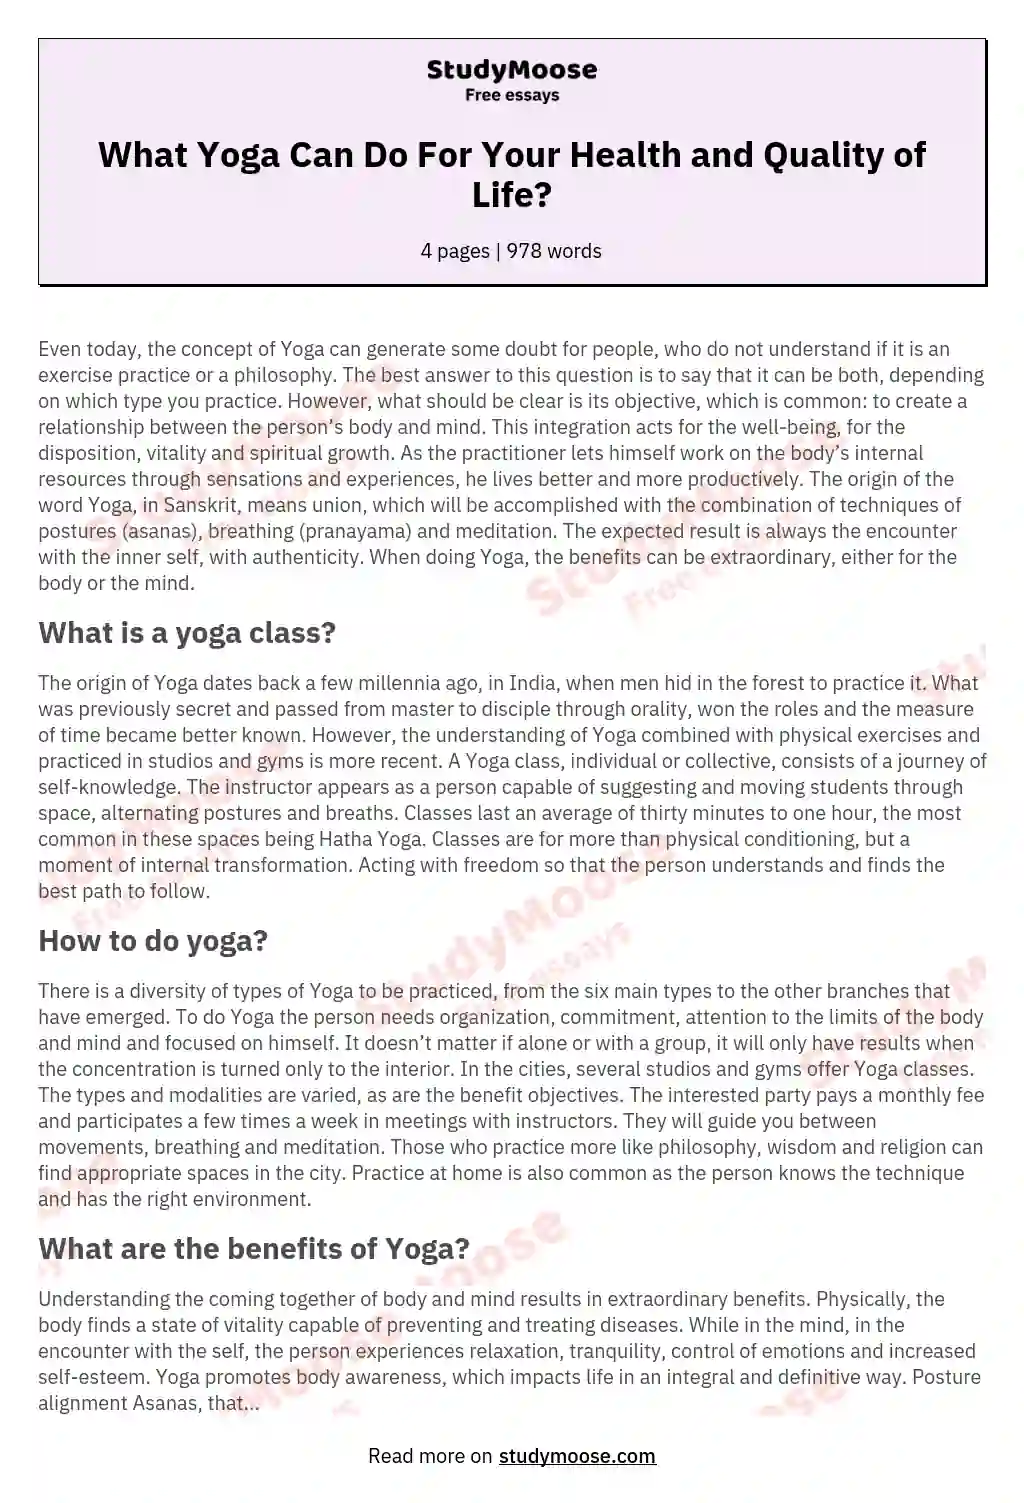 What Yoga Can Do For Your Health and Quality of Life? essay